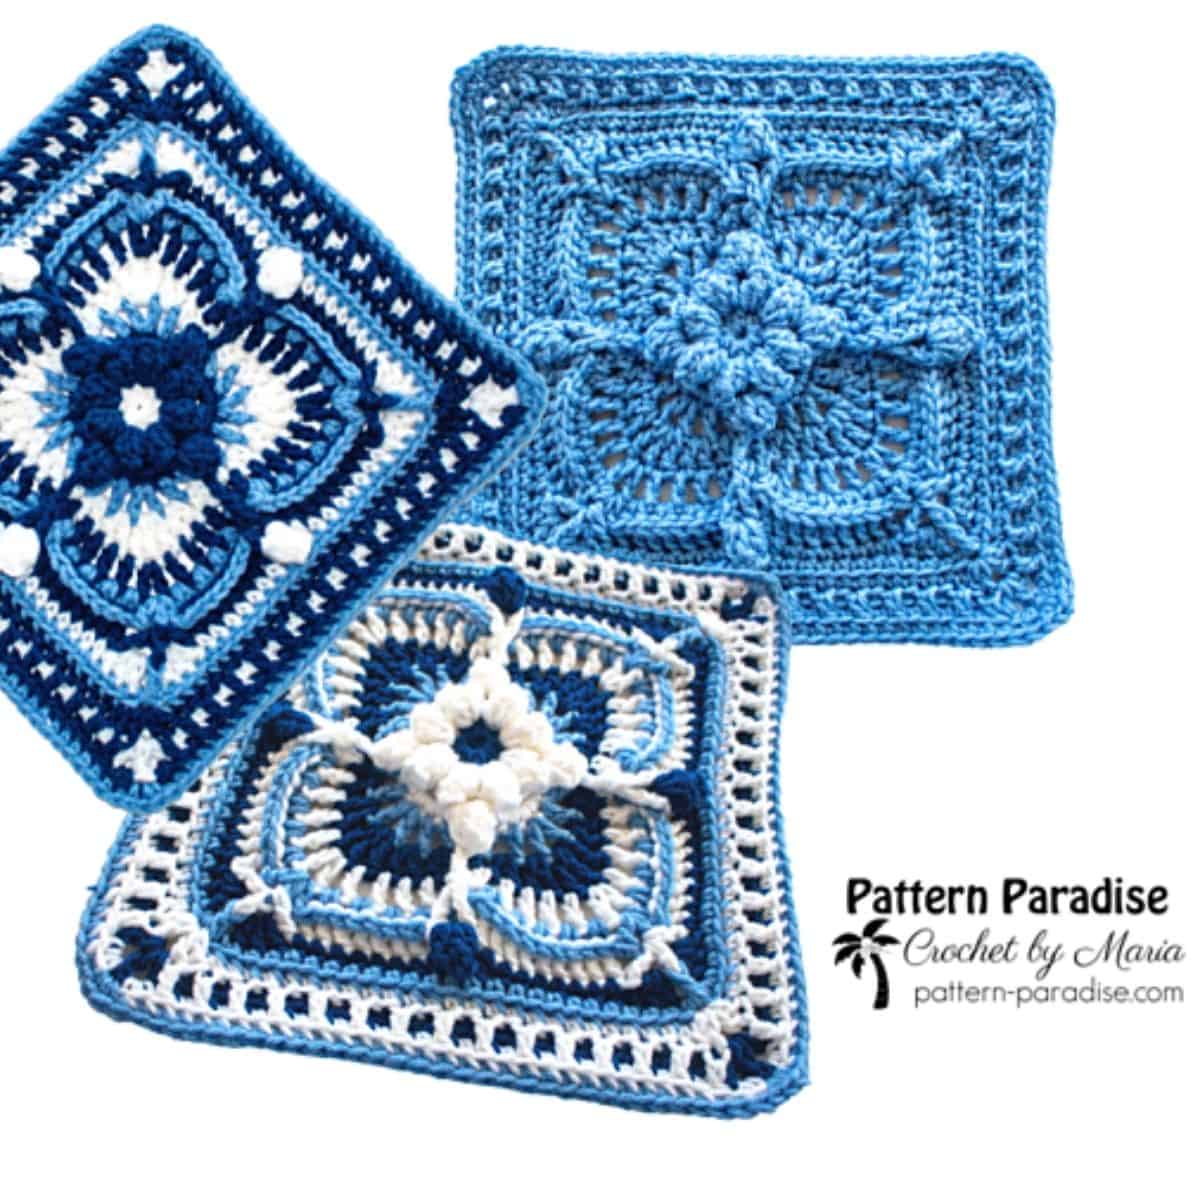 three crochet granny squares in shades of blue with a raised flower motif